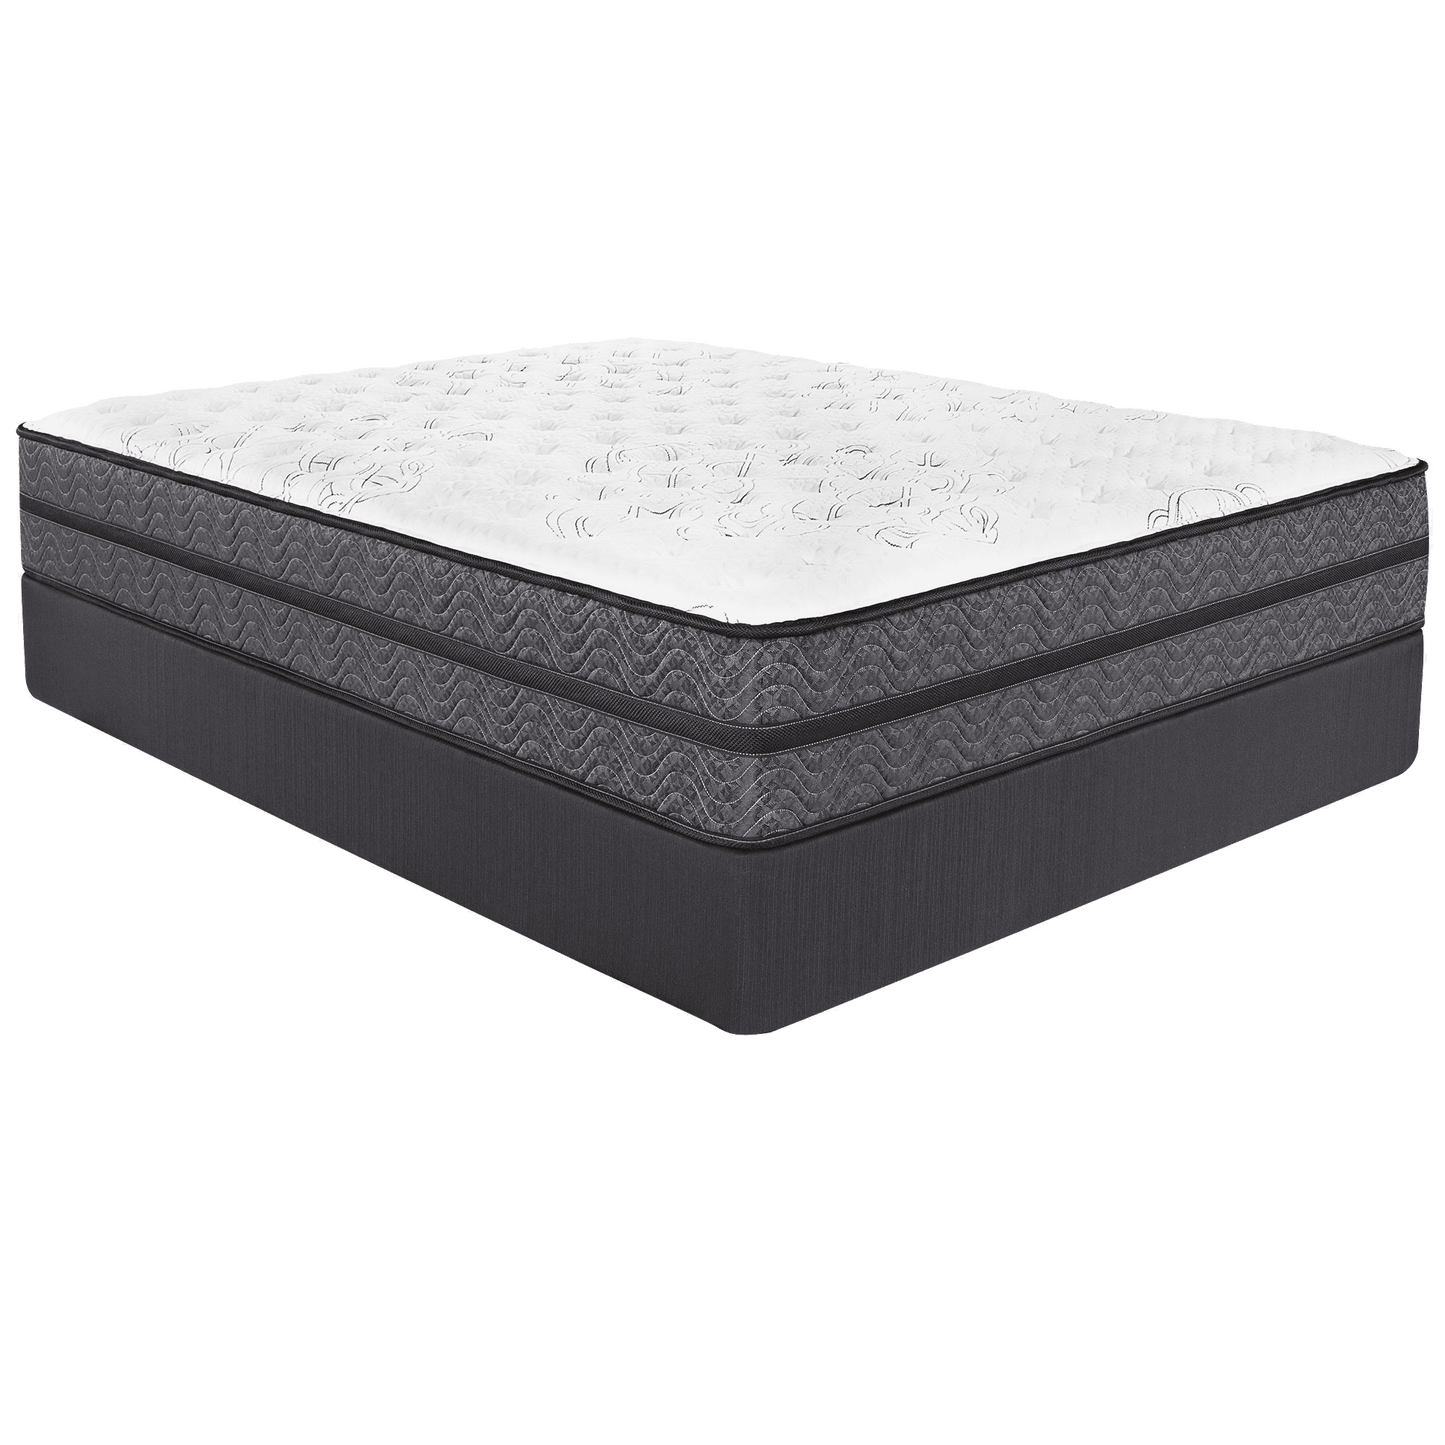 Premium Comfort Prelude II Firm Mattress by Southerland.